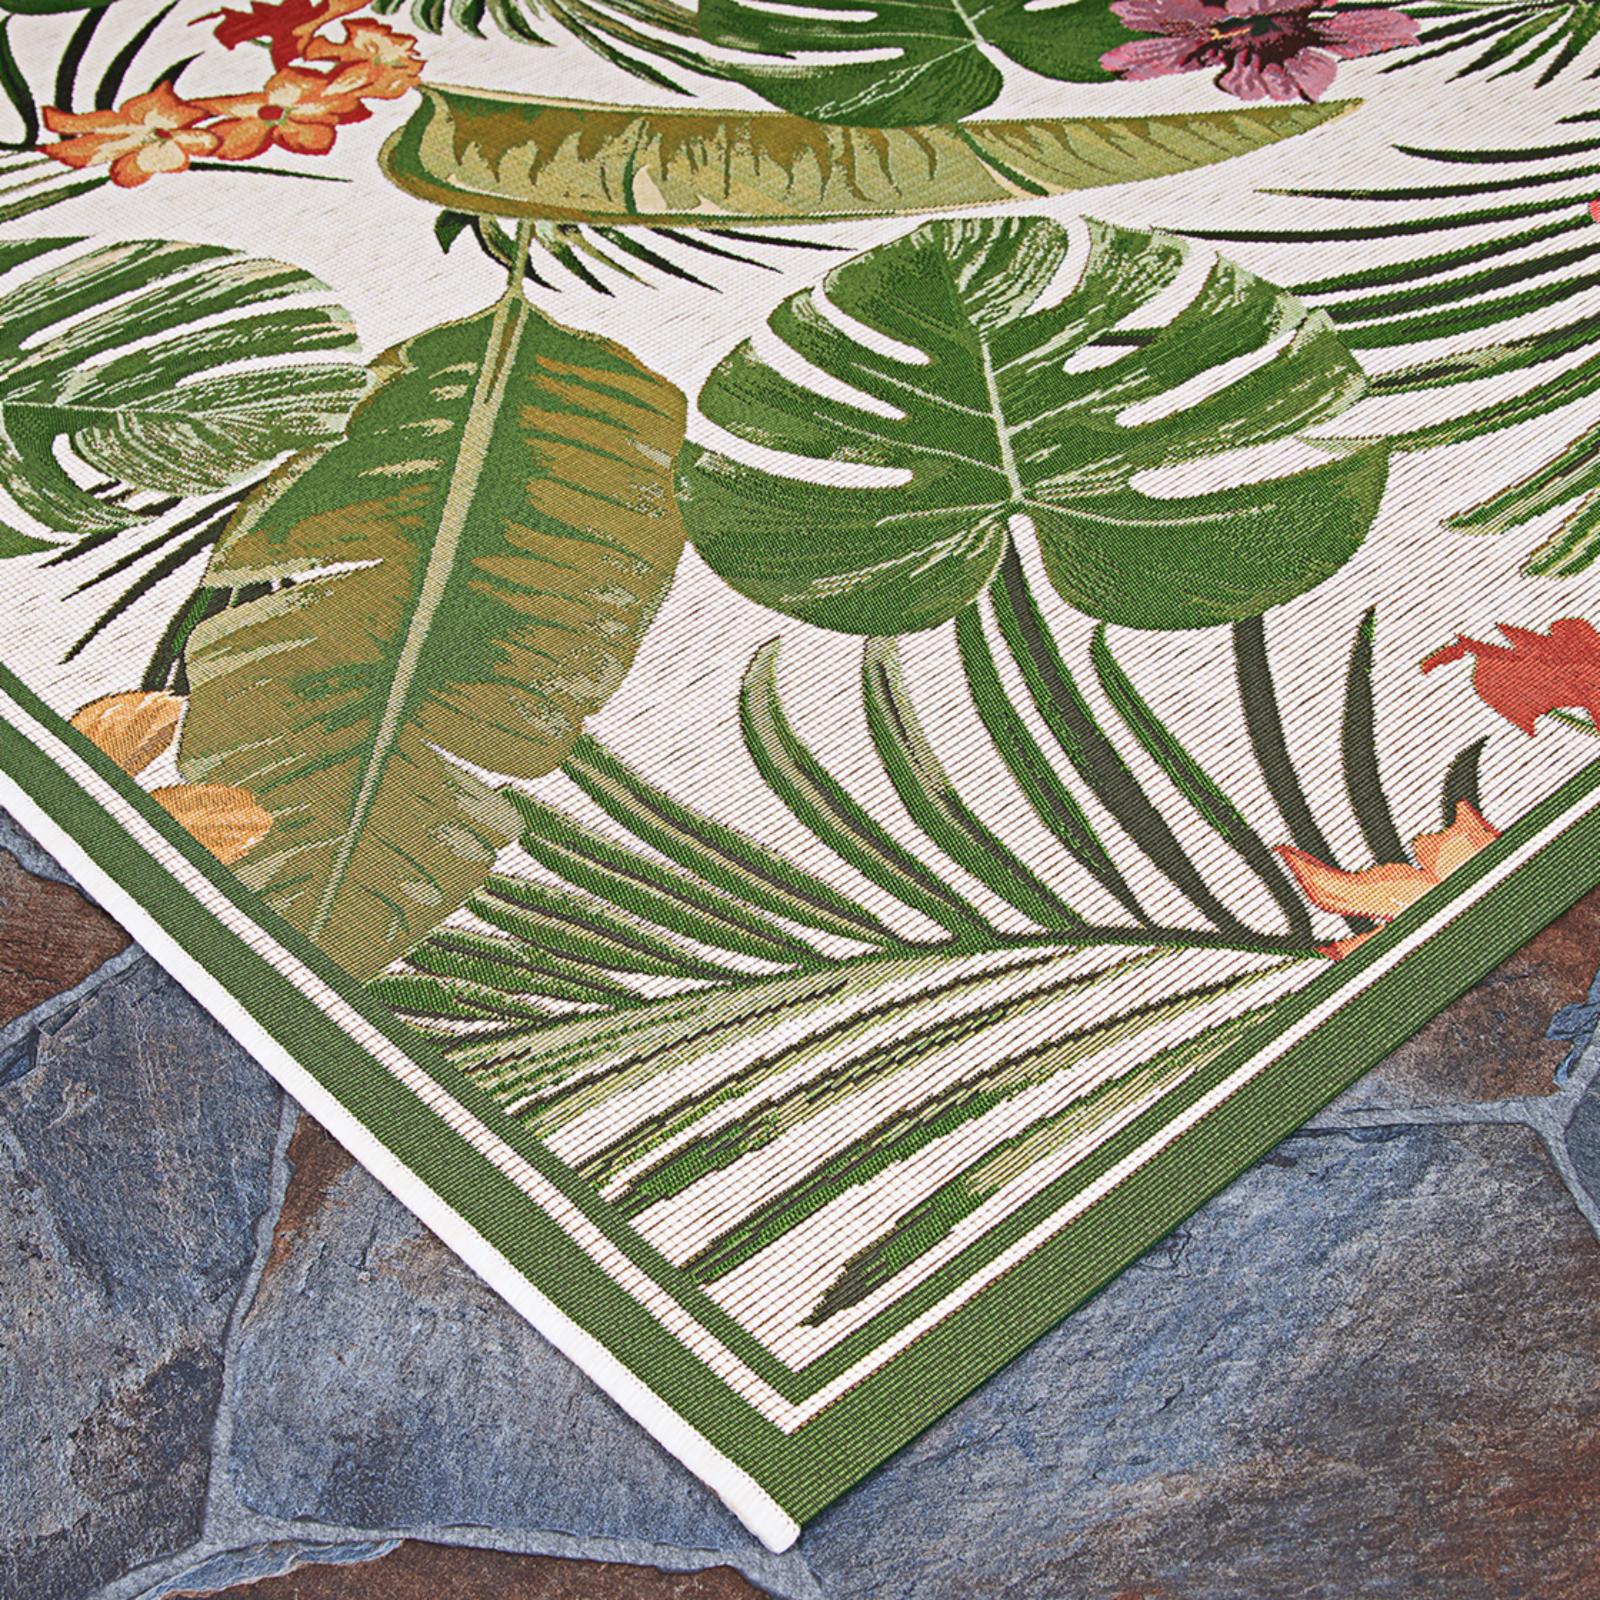 Couristan Dolce Flowering Fern Indoor / Outdoor Area Rug, Ivory-Hunter Green, 5'3" x 7'6" - image 5 of 6